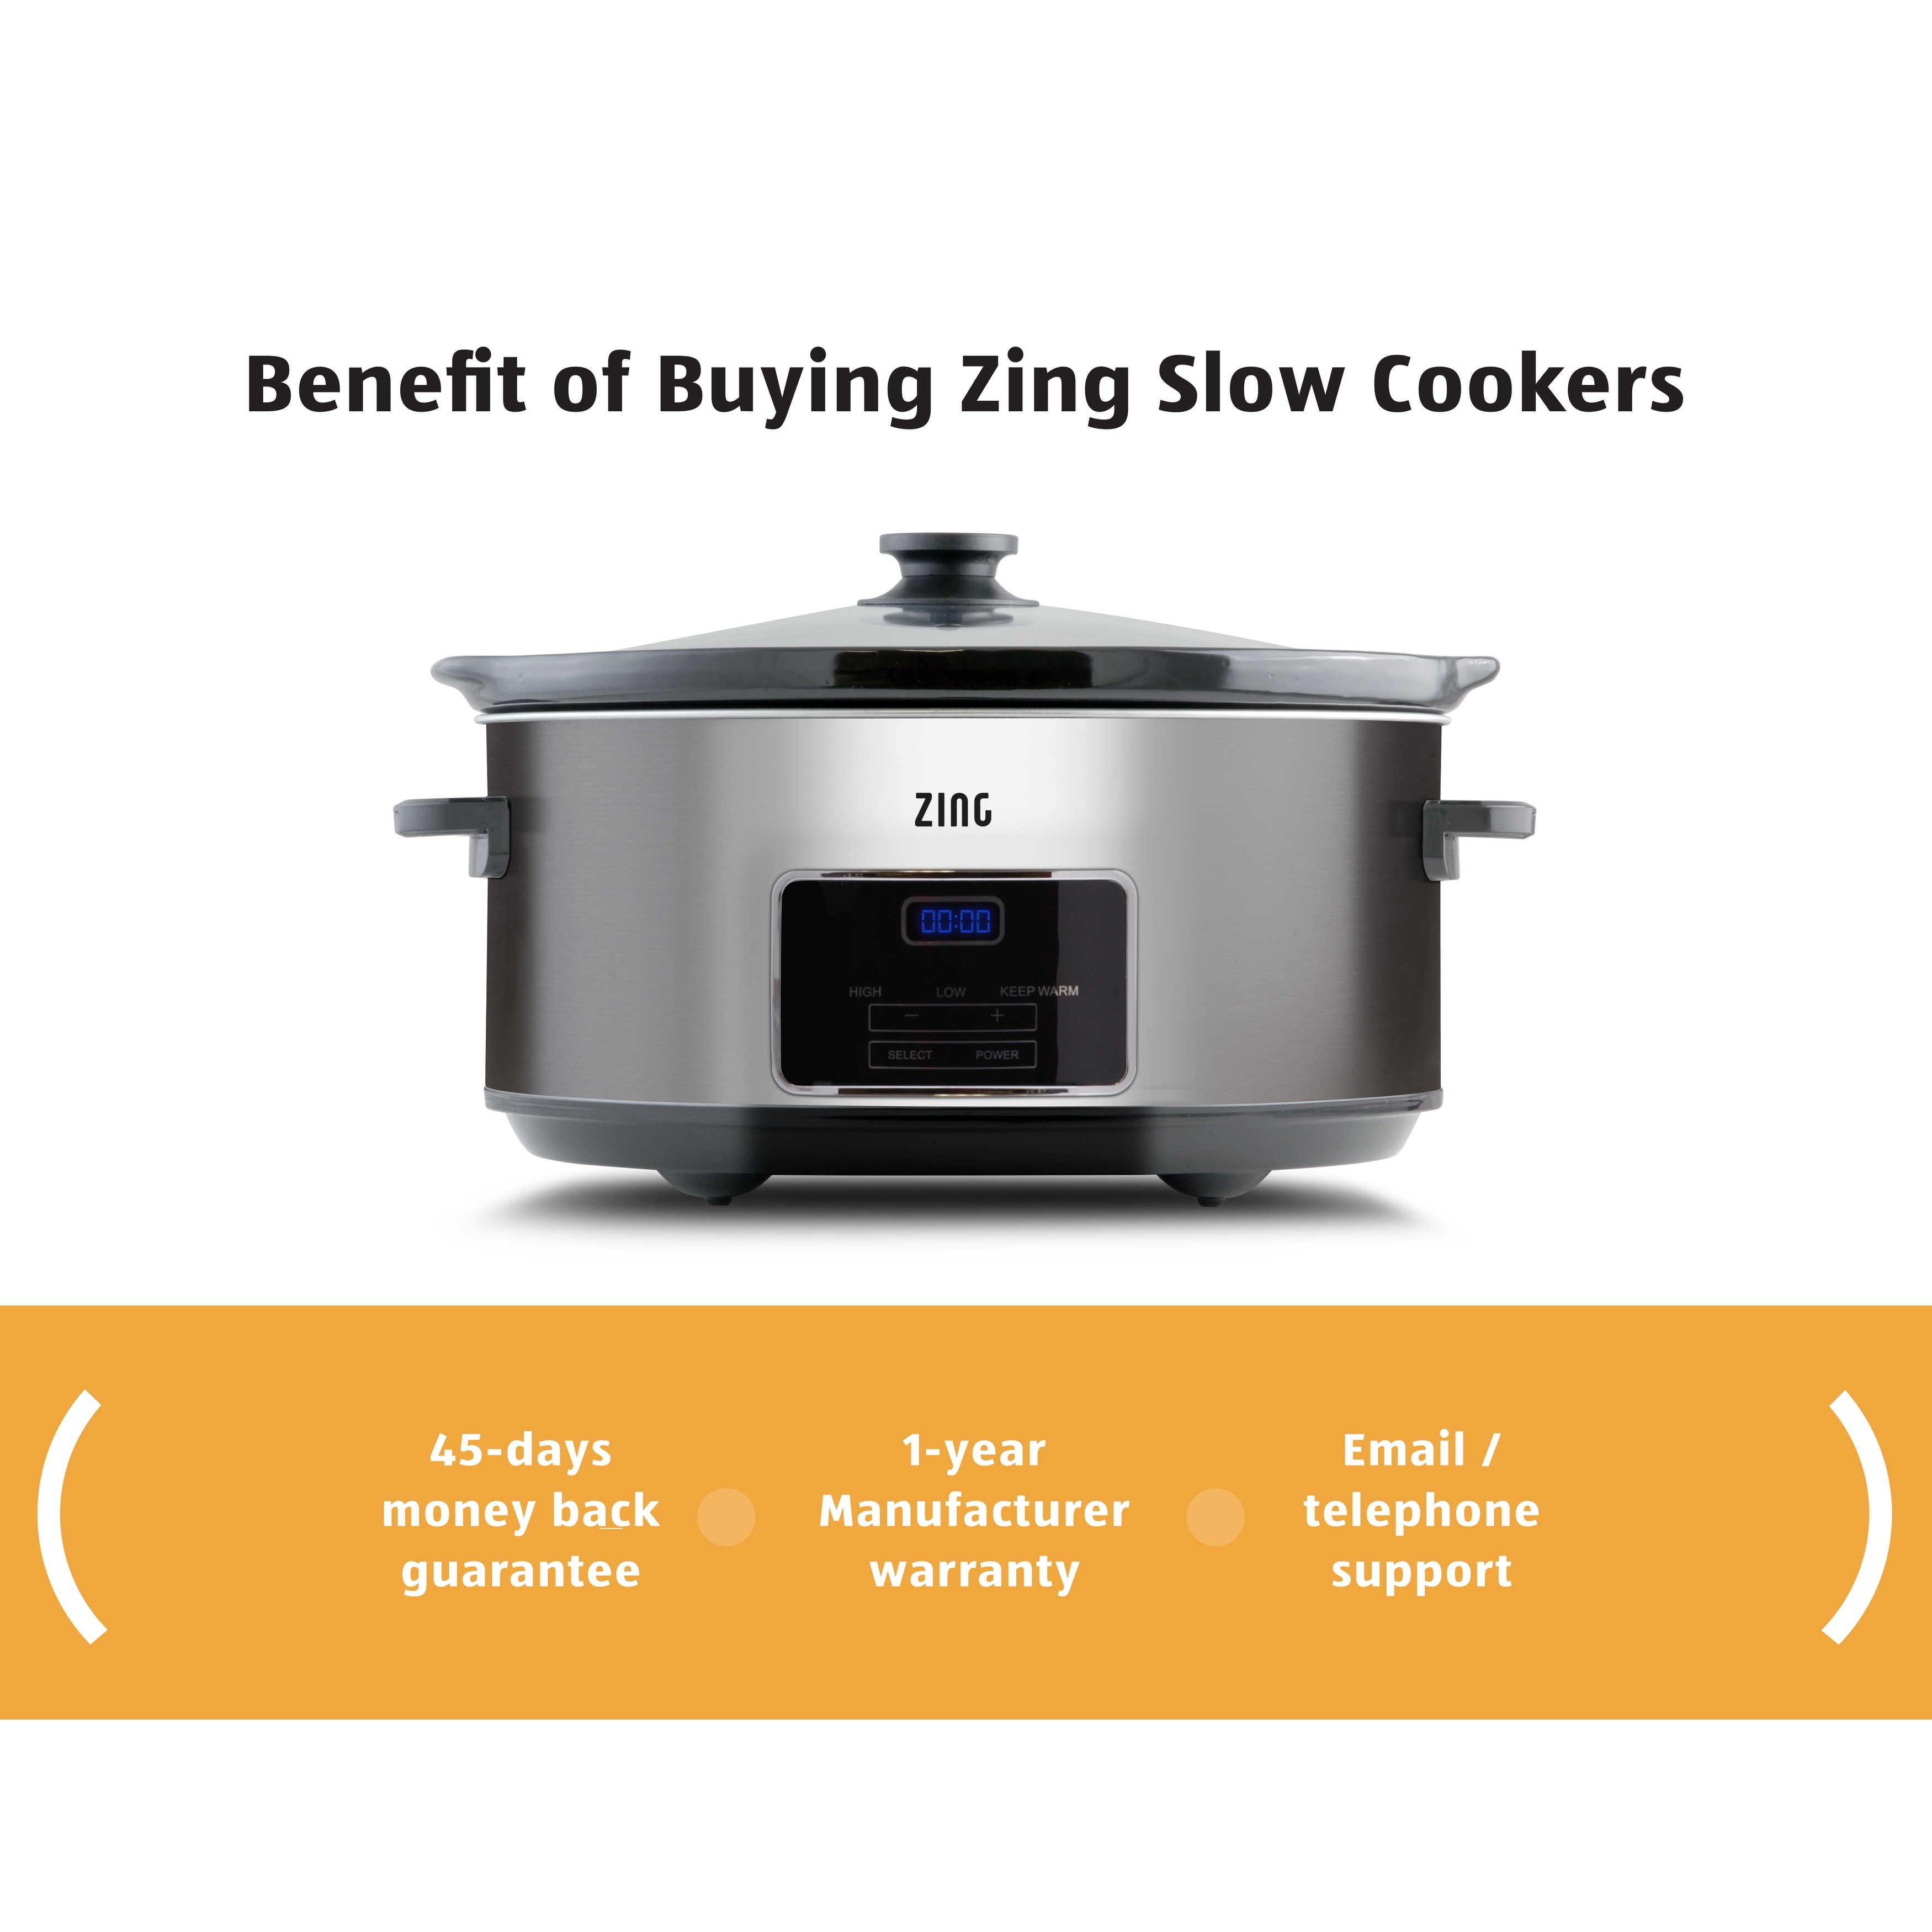 Zing 8-Quart Manual Oval Slow Cooker (Silver)